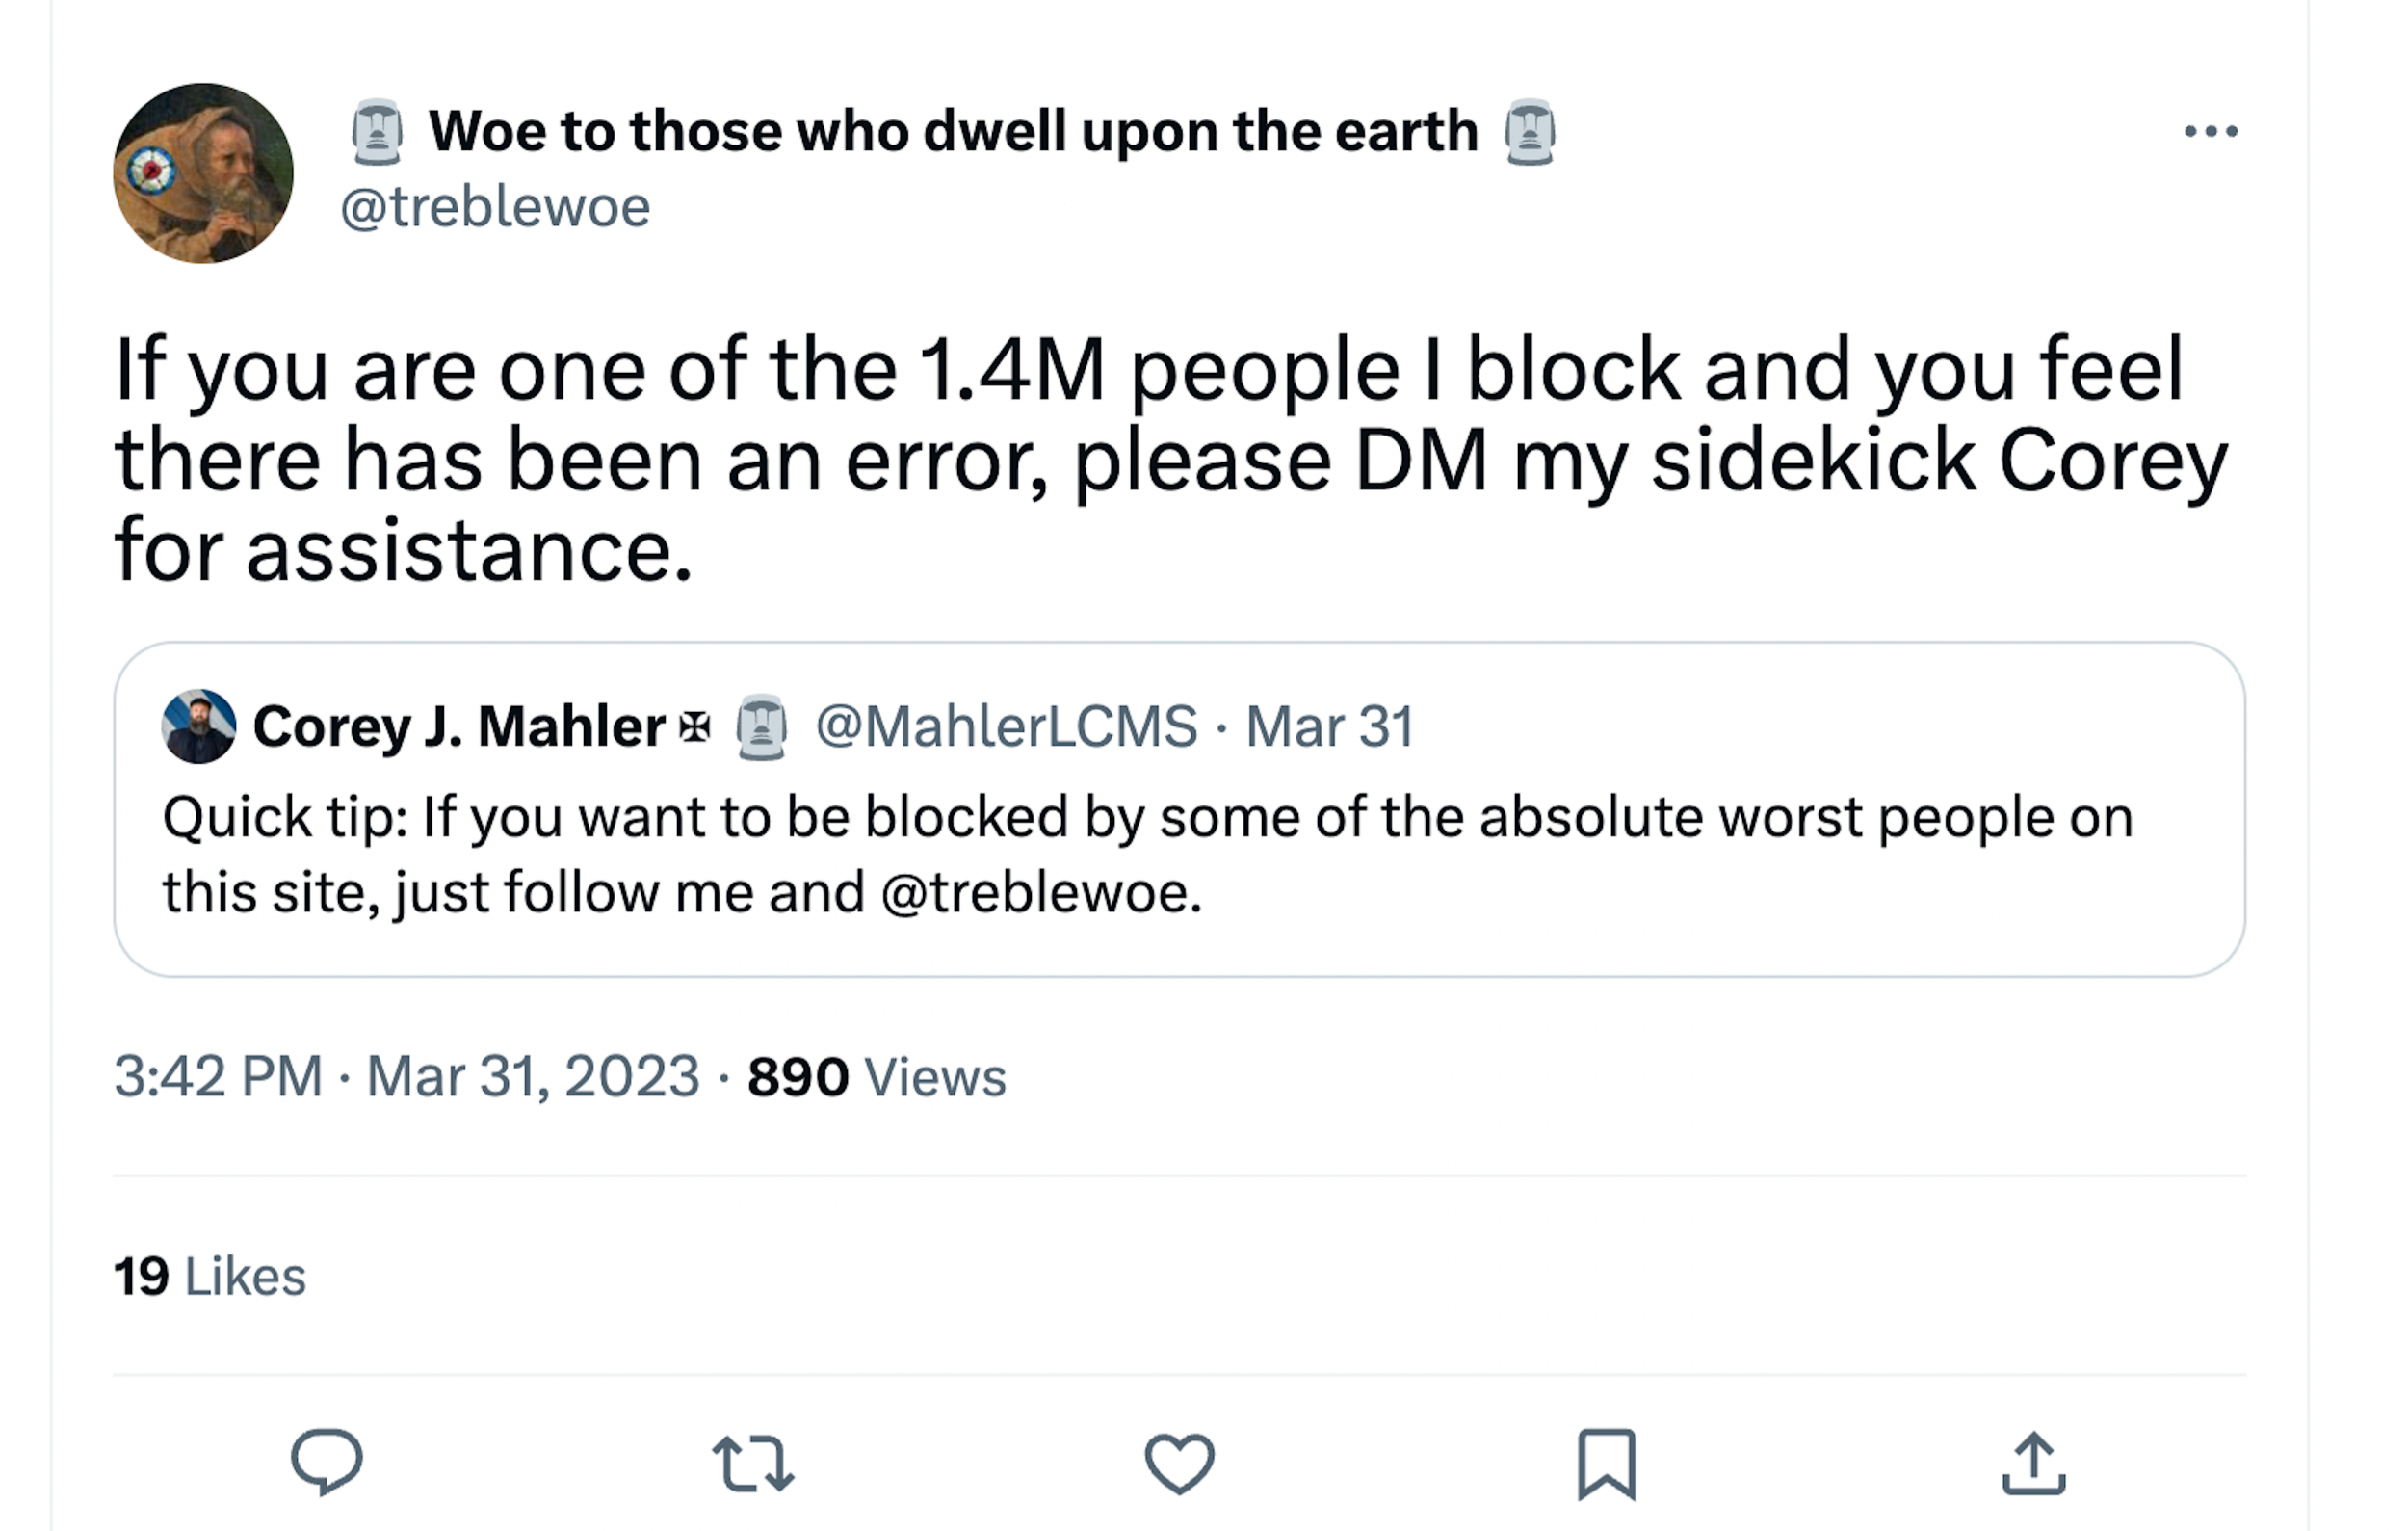 Treblewoe saying that anyone who thinks they have been accidentally added to his block list of “over 1.4 million people” should let him know, QTing Mahler boasting that people should follow him if they want to be “blocked by some of the worst people on the Internet.”